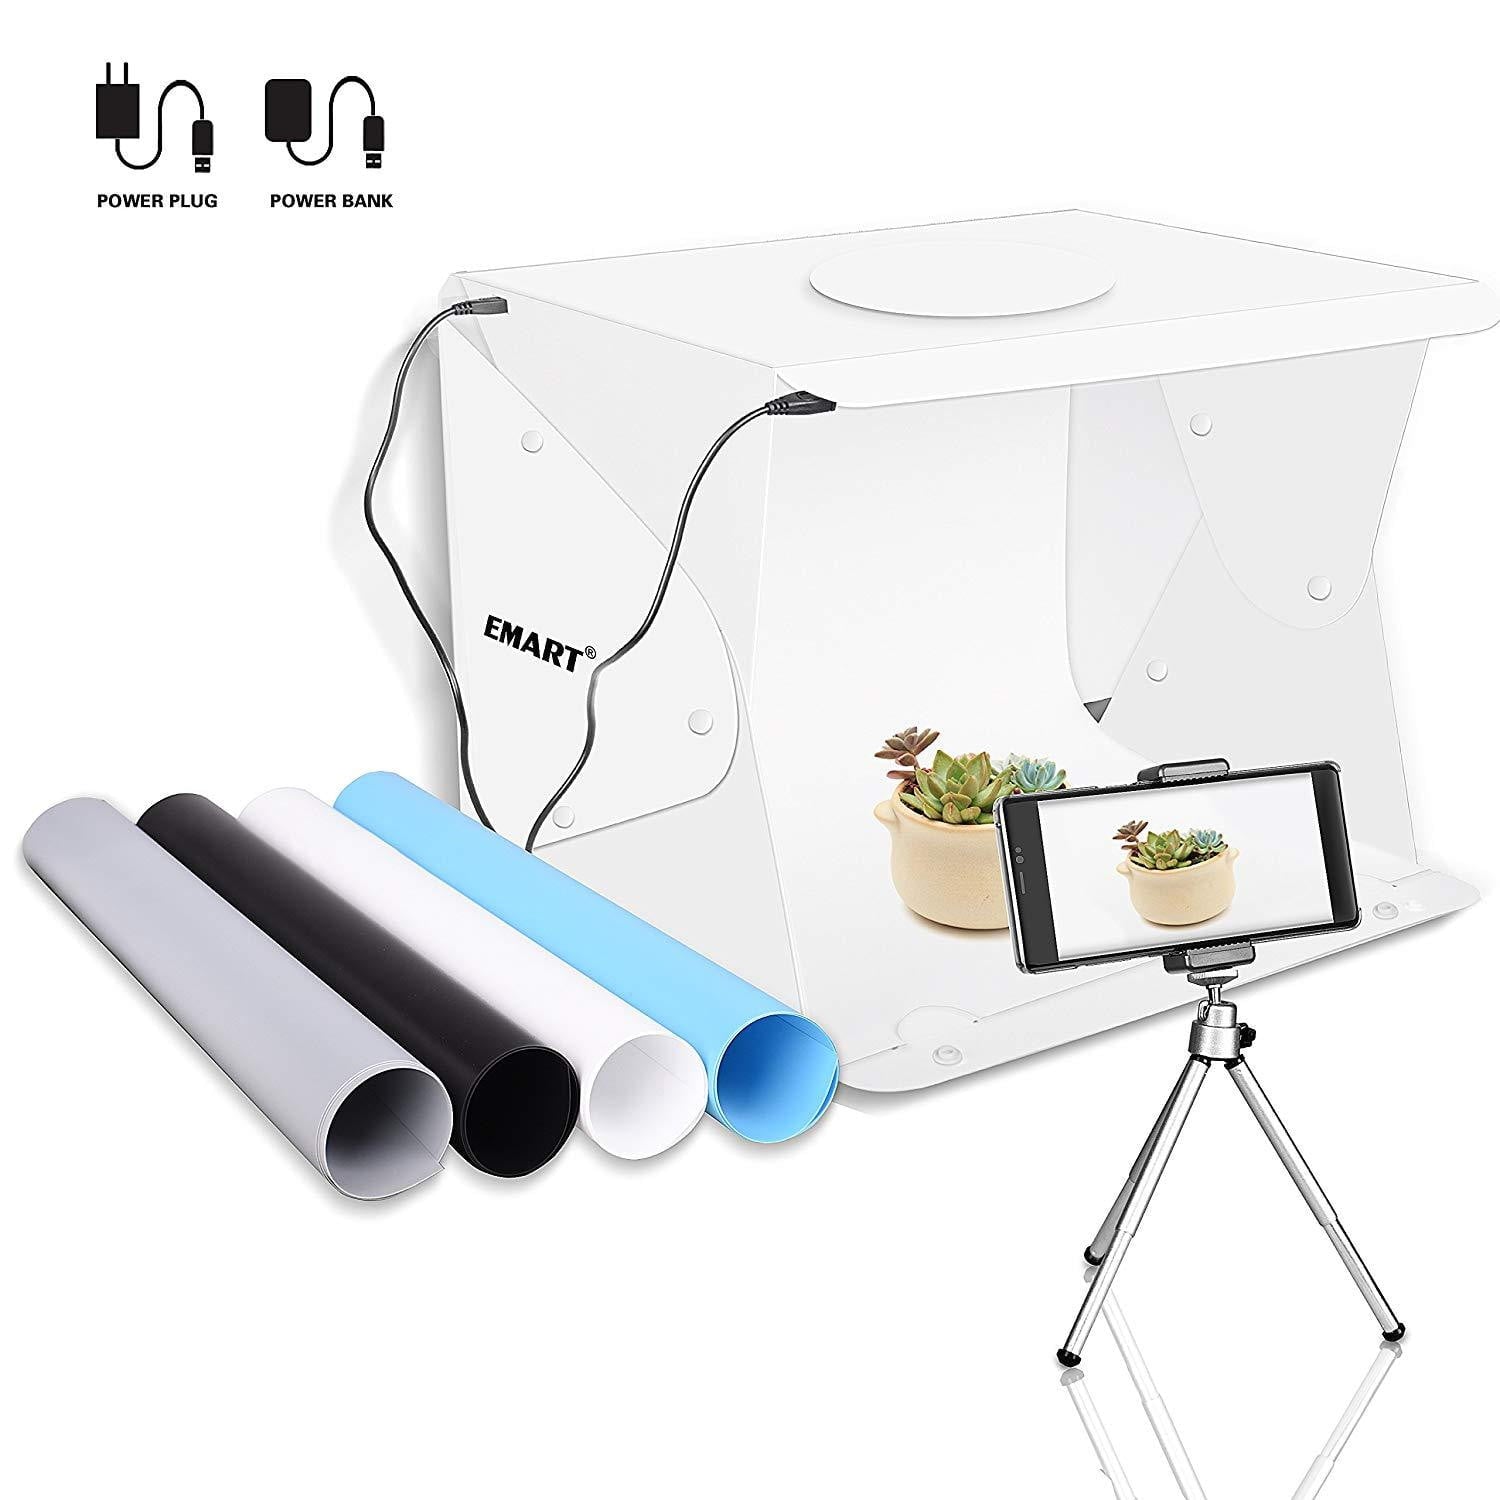 EMART 14" x 16" Photography Table Top Light Shooting Tent